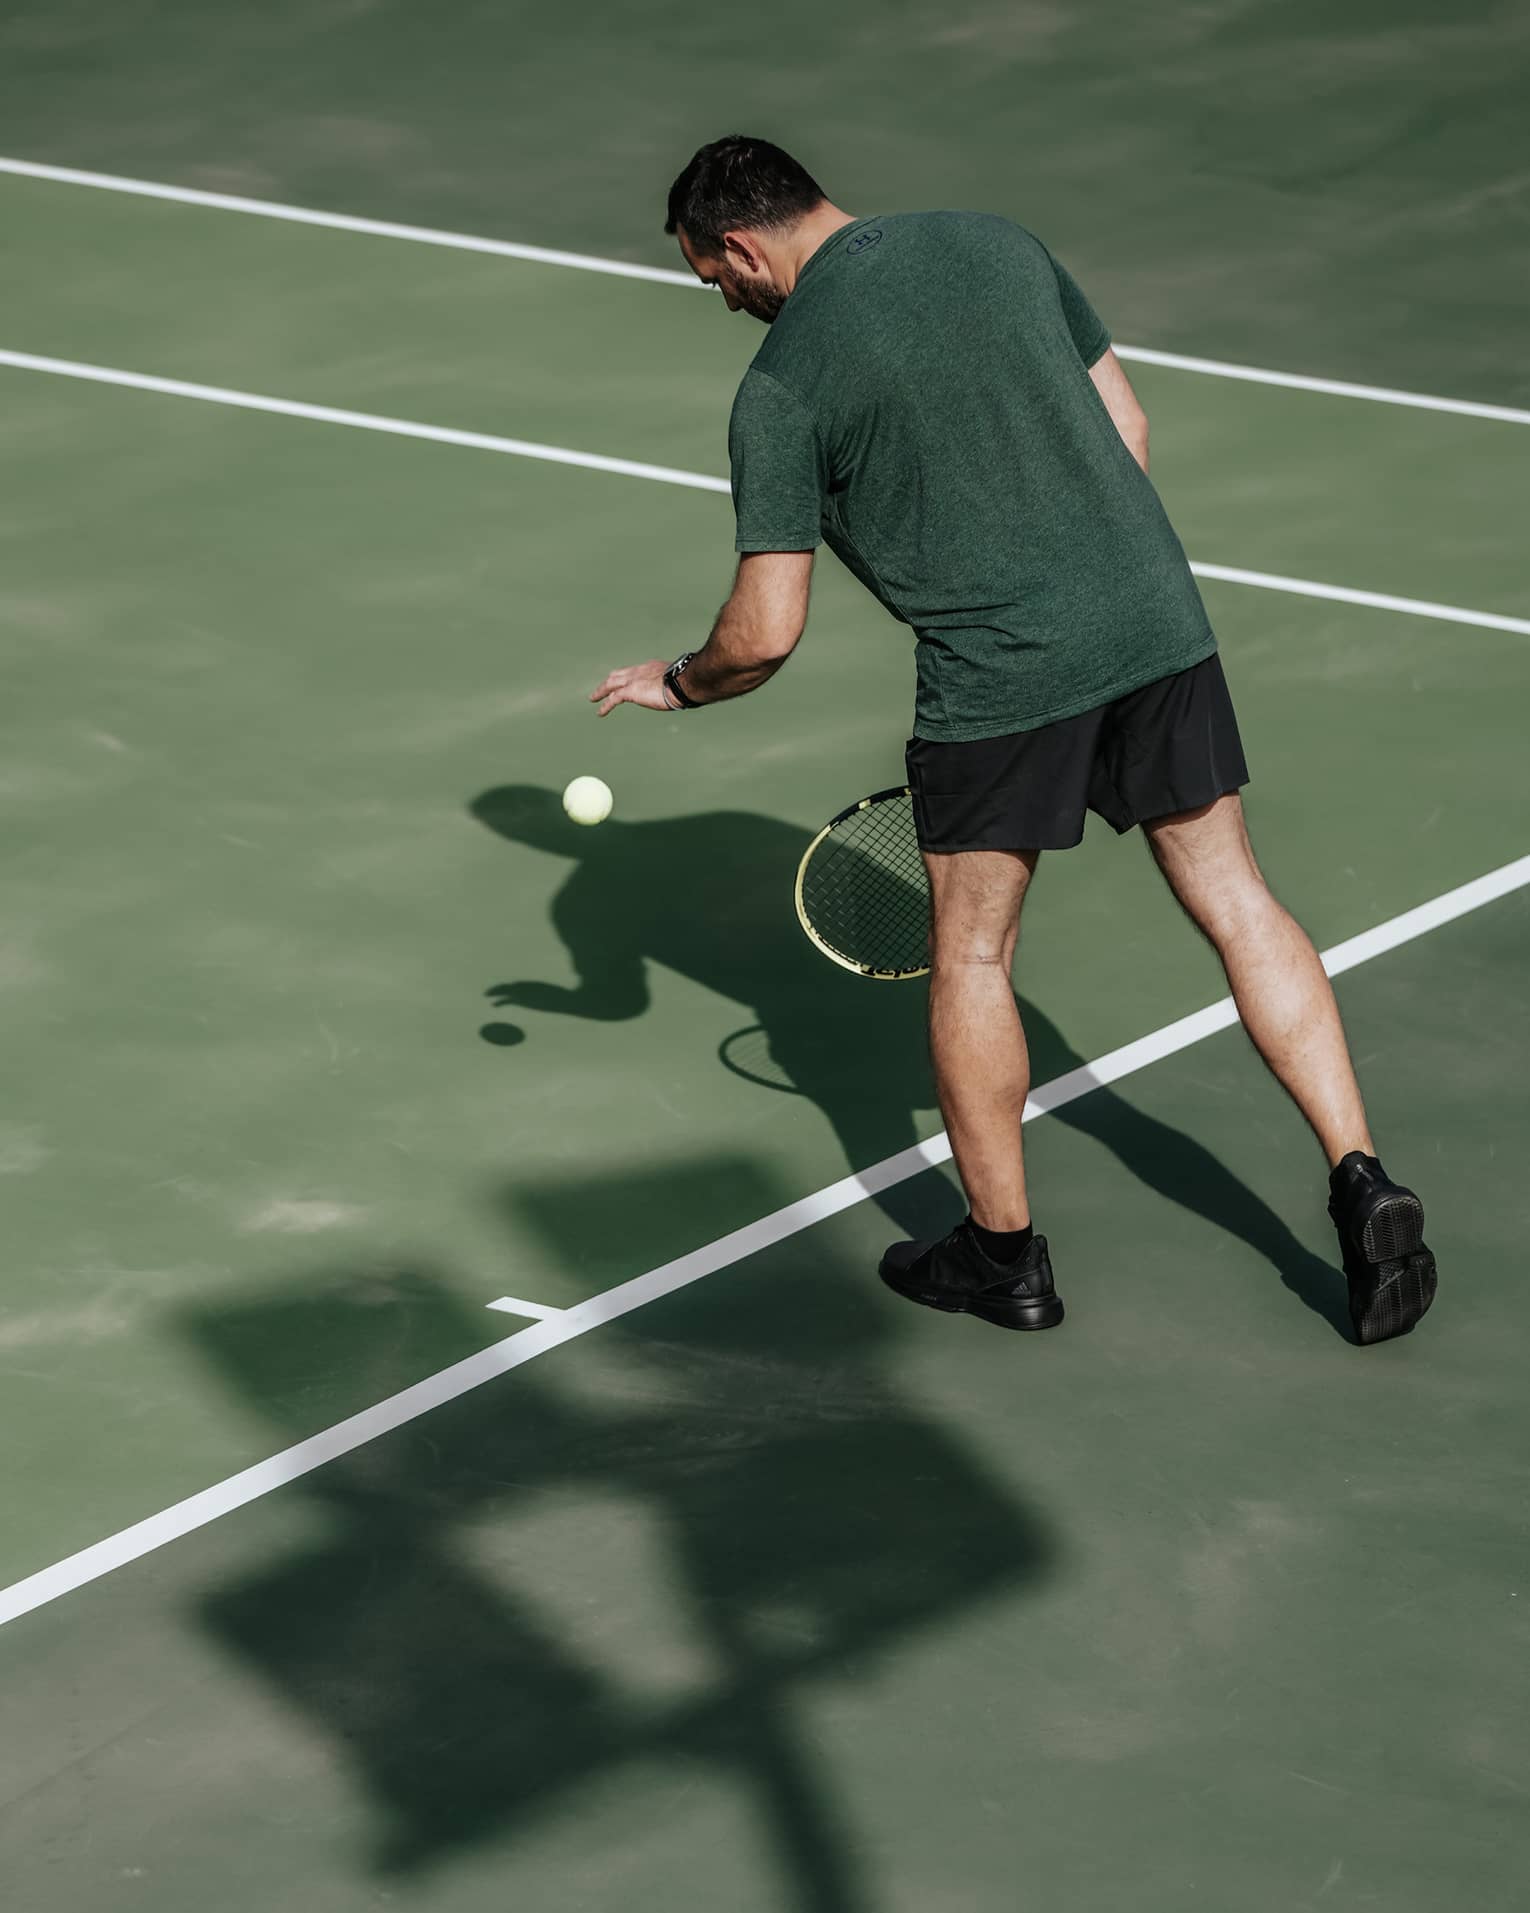 Man on tennis court bouncing tennis ball with left hand, preparing to serve